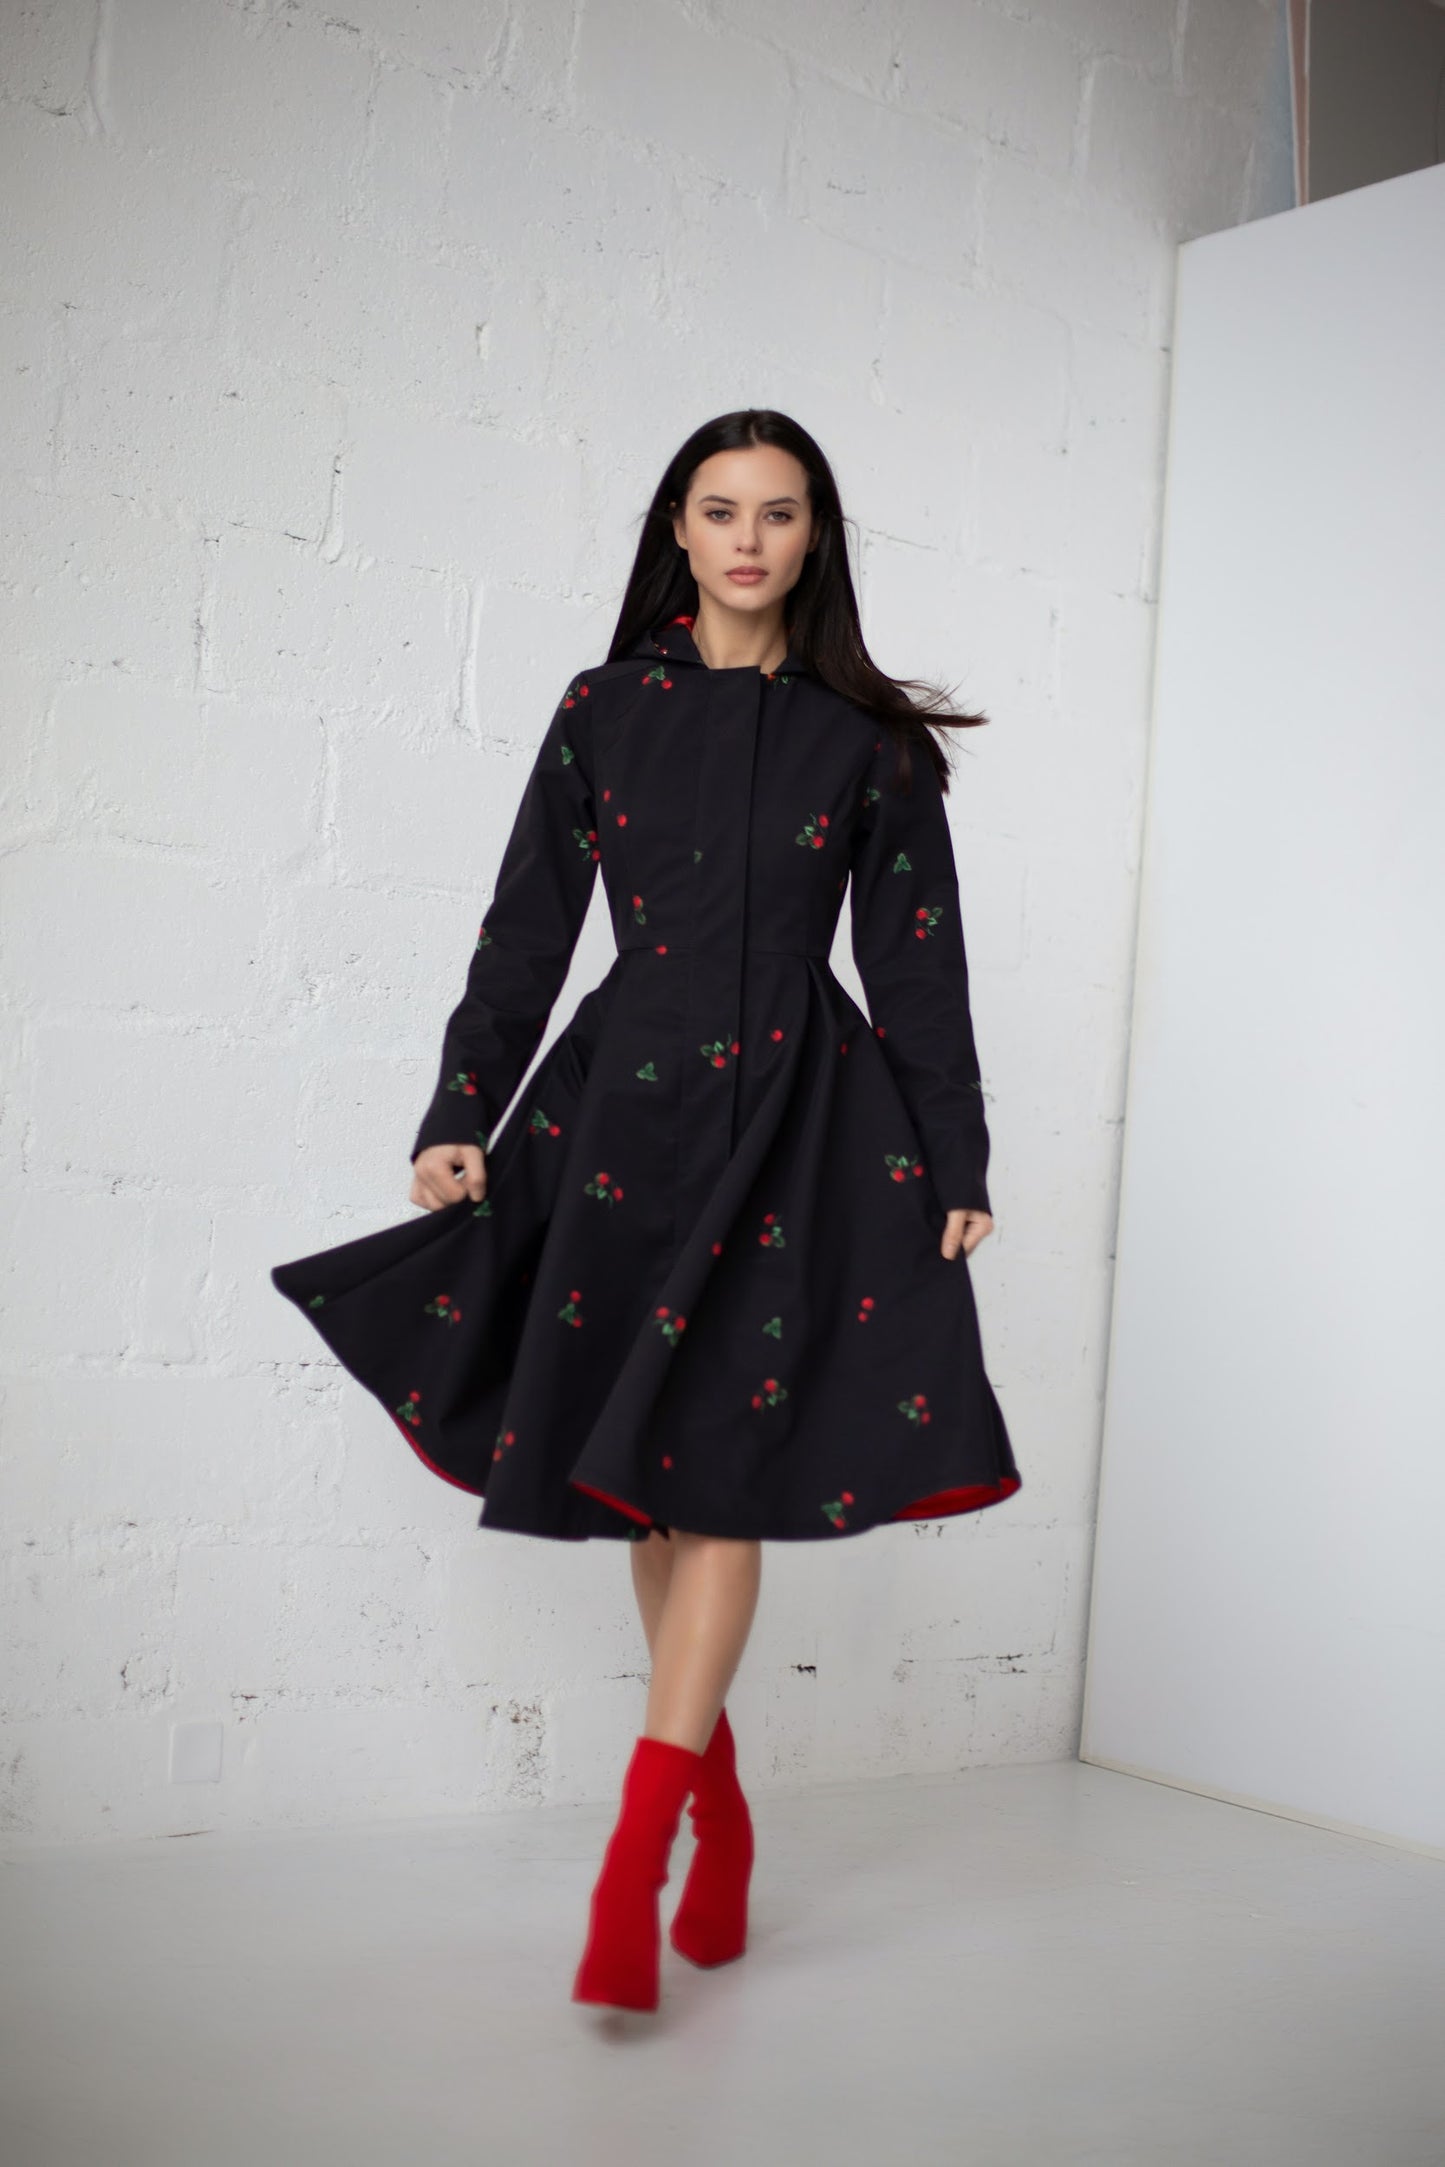 fitted and flared Waterproof Coat with Red Strawberry Print on black background